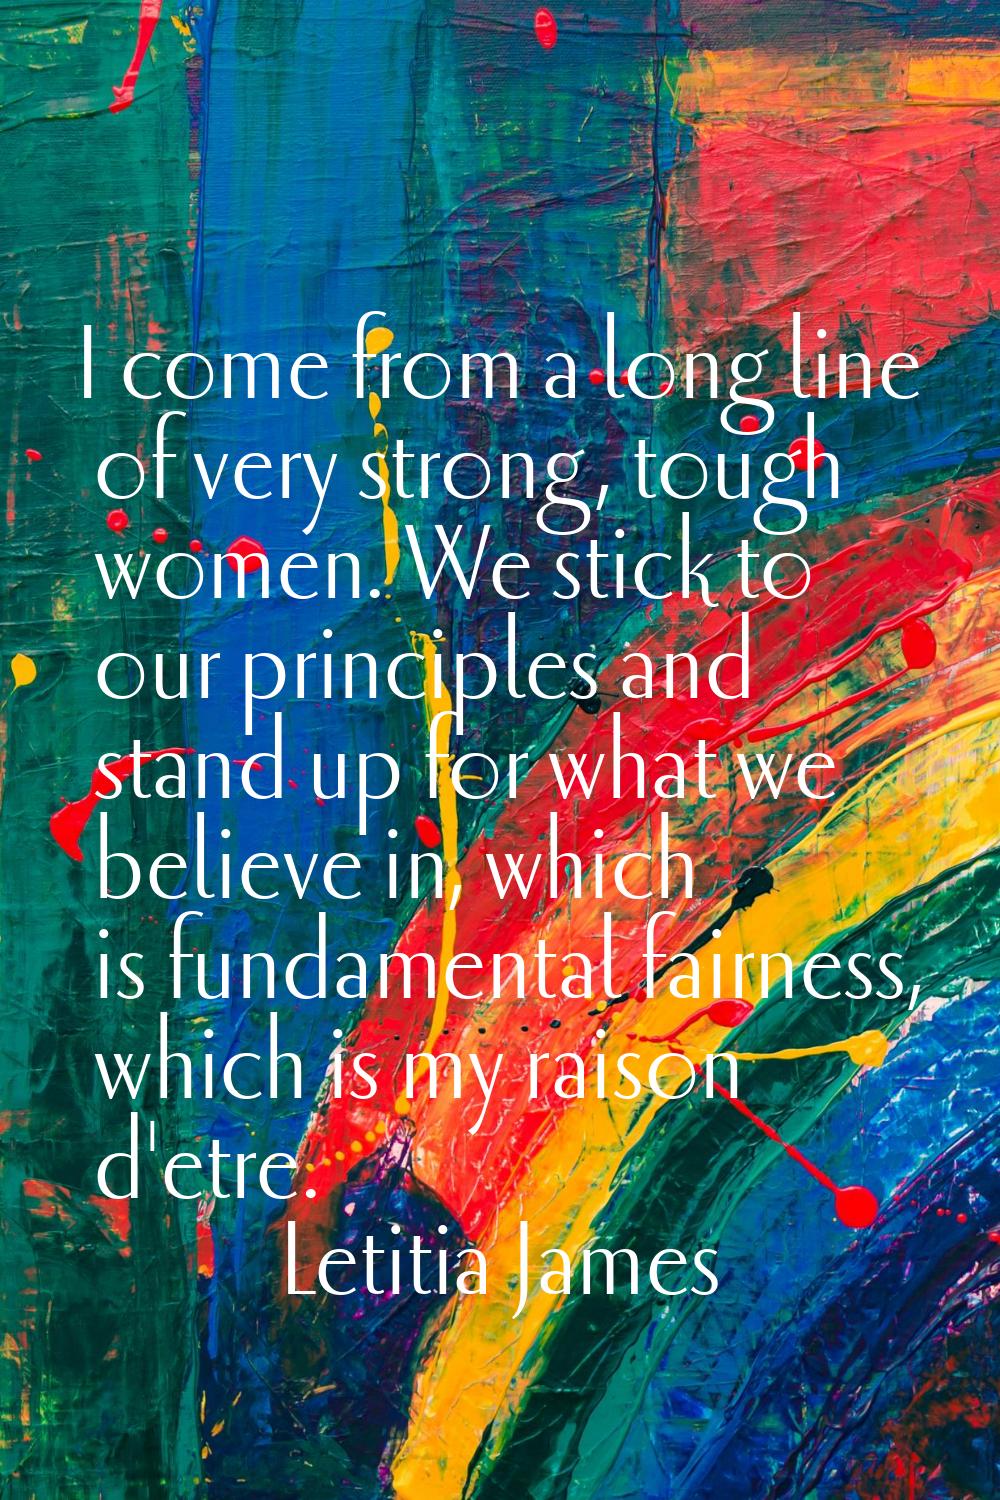 I come from a long line of very strong, tough women. We stick to our principles and stand up for wh